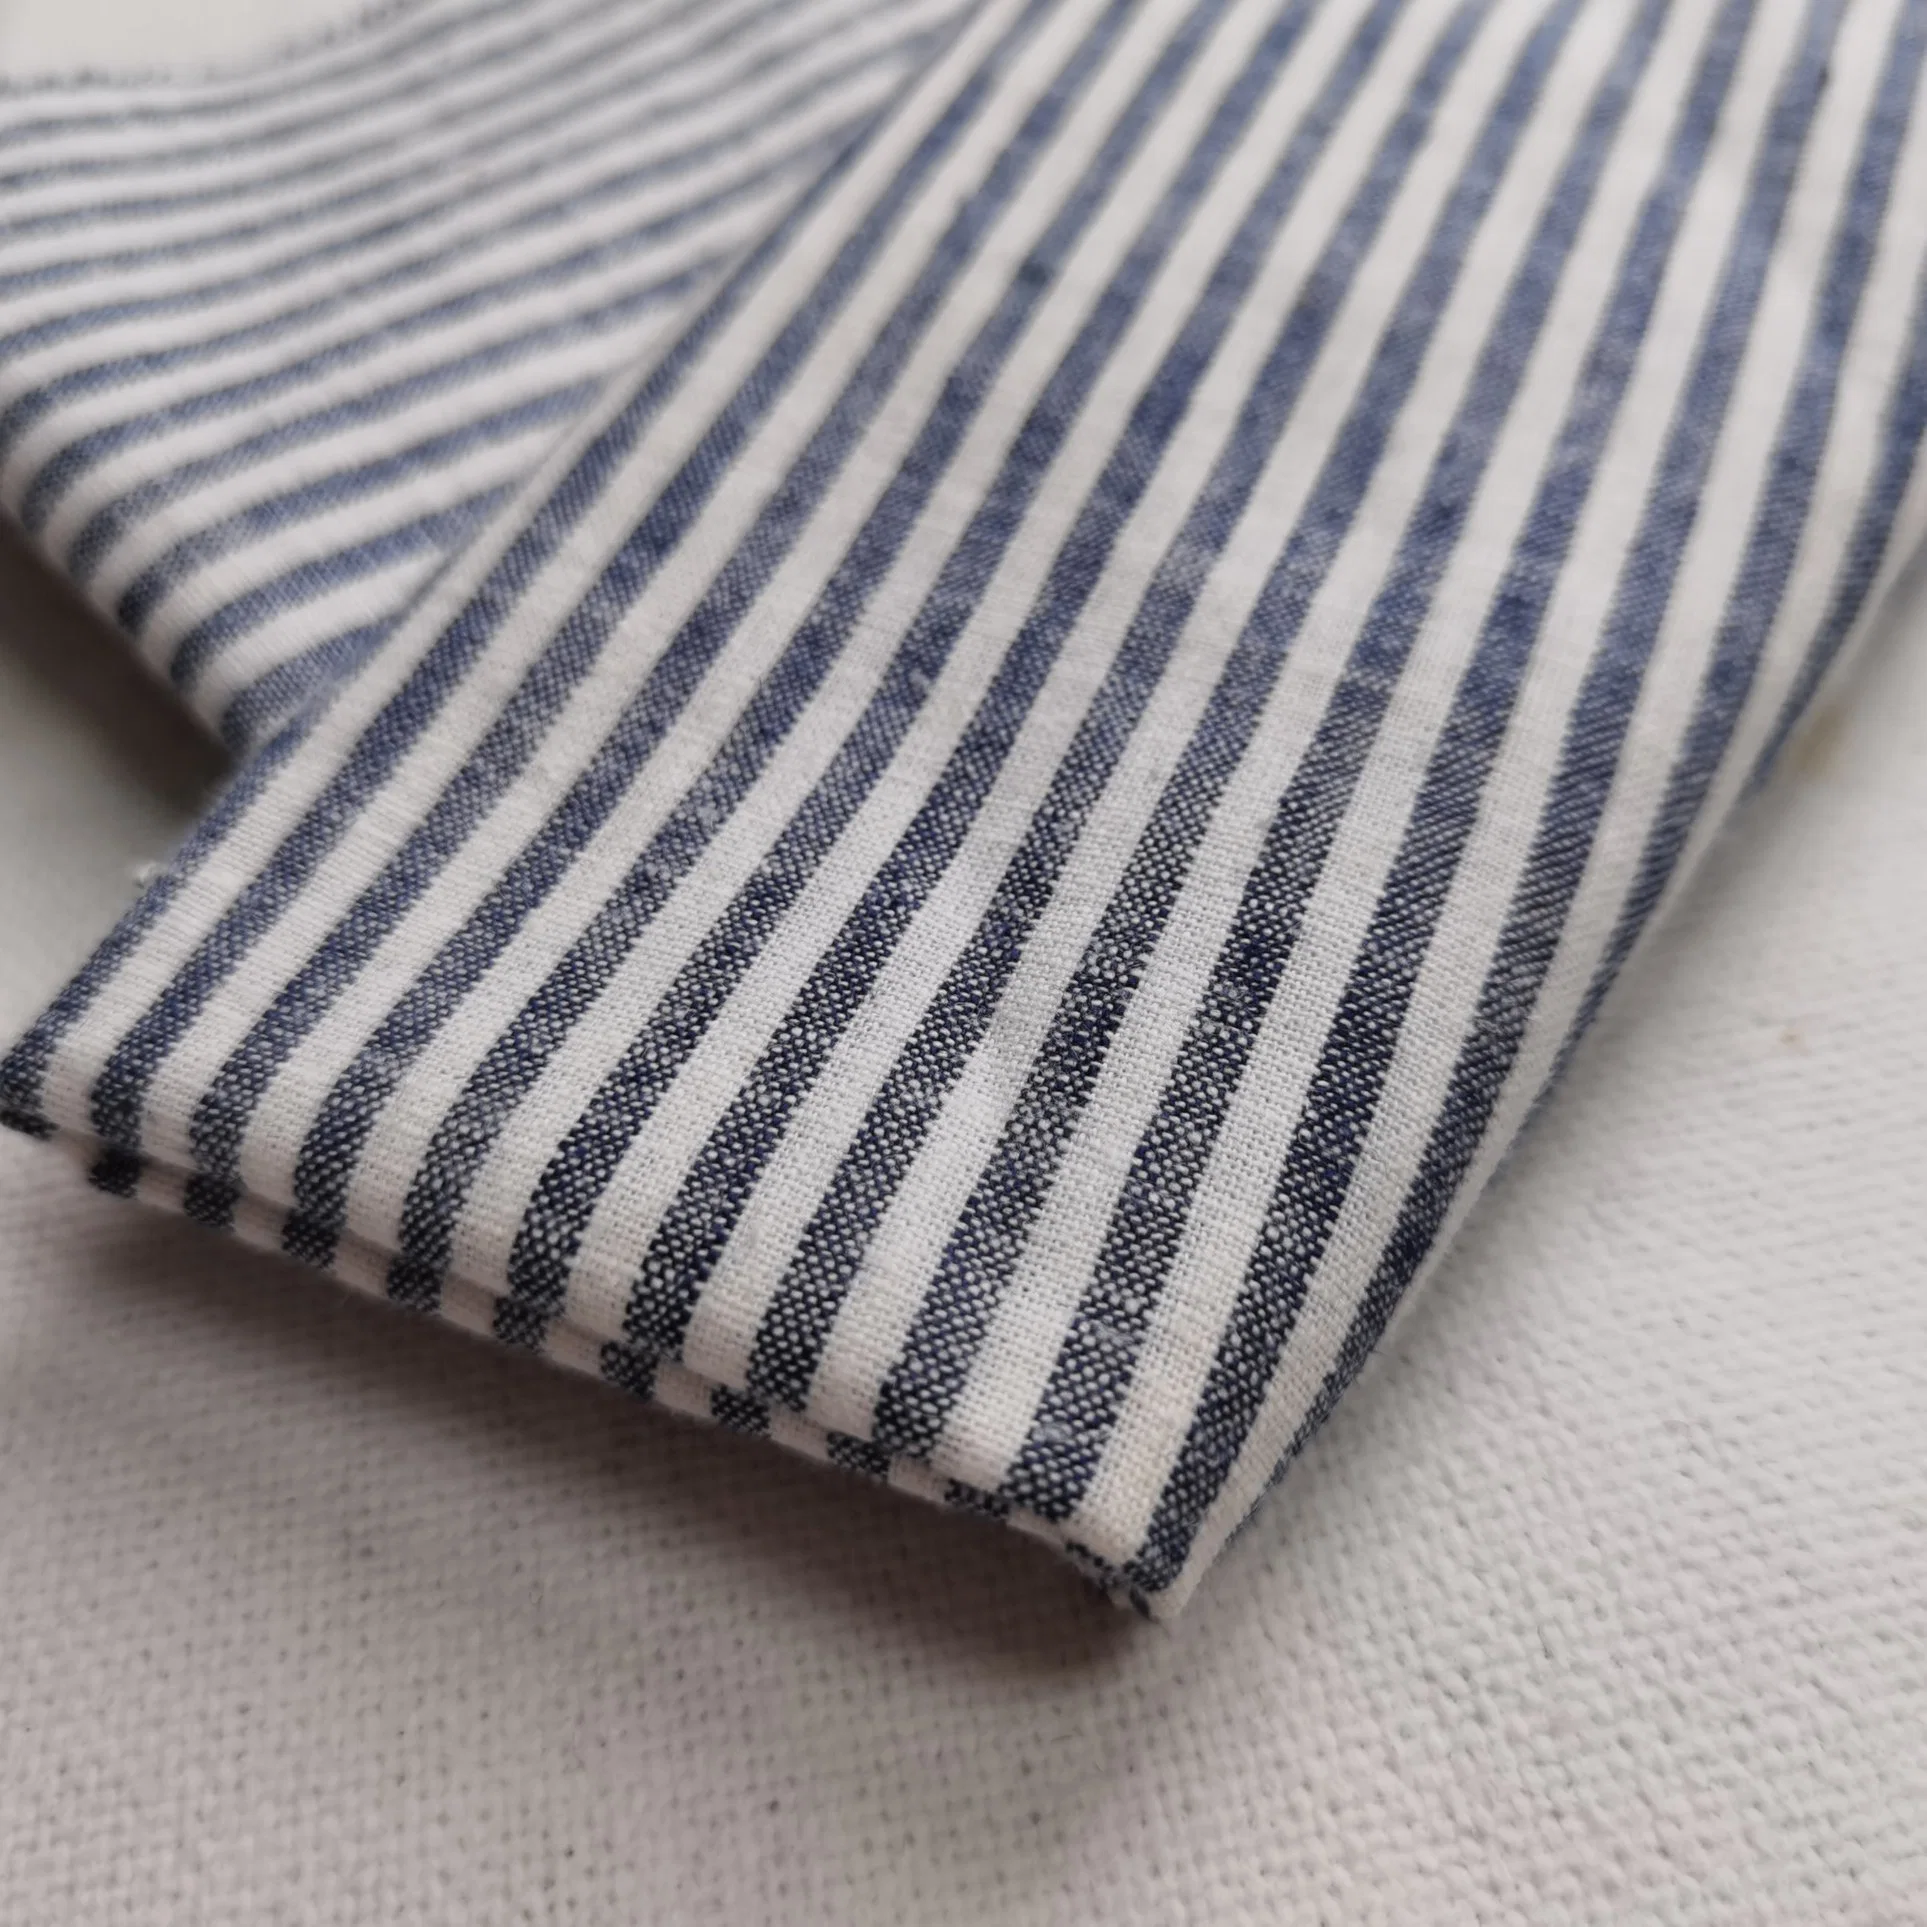 Linen Cotton Fabric for Household Suppliers and Garment 8*8 Yarn Dyed